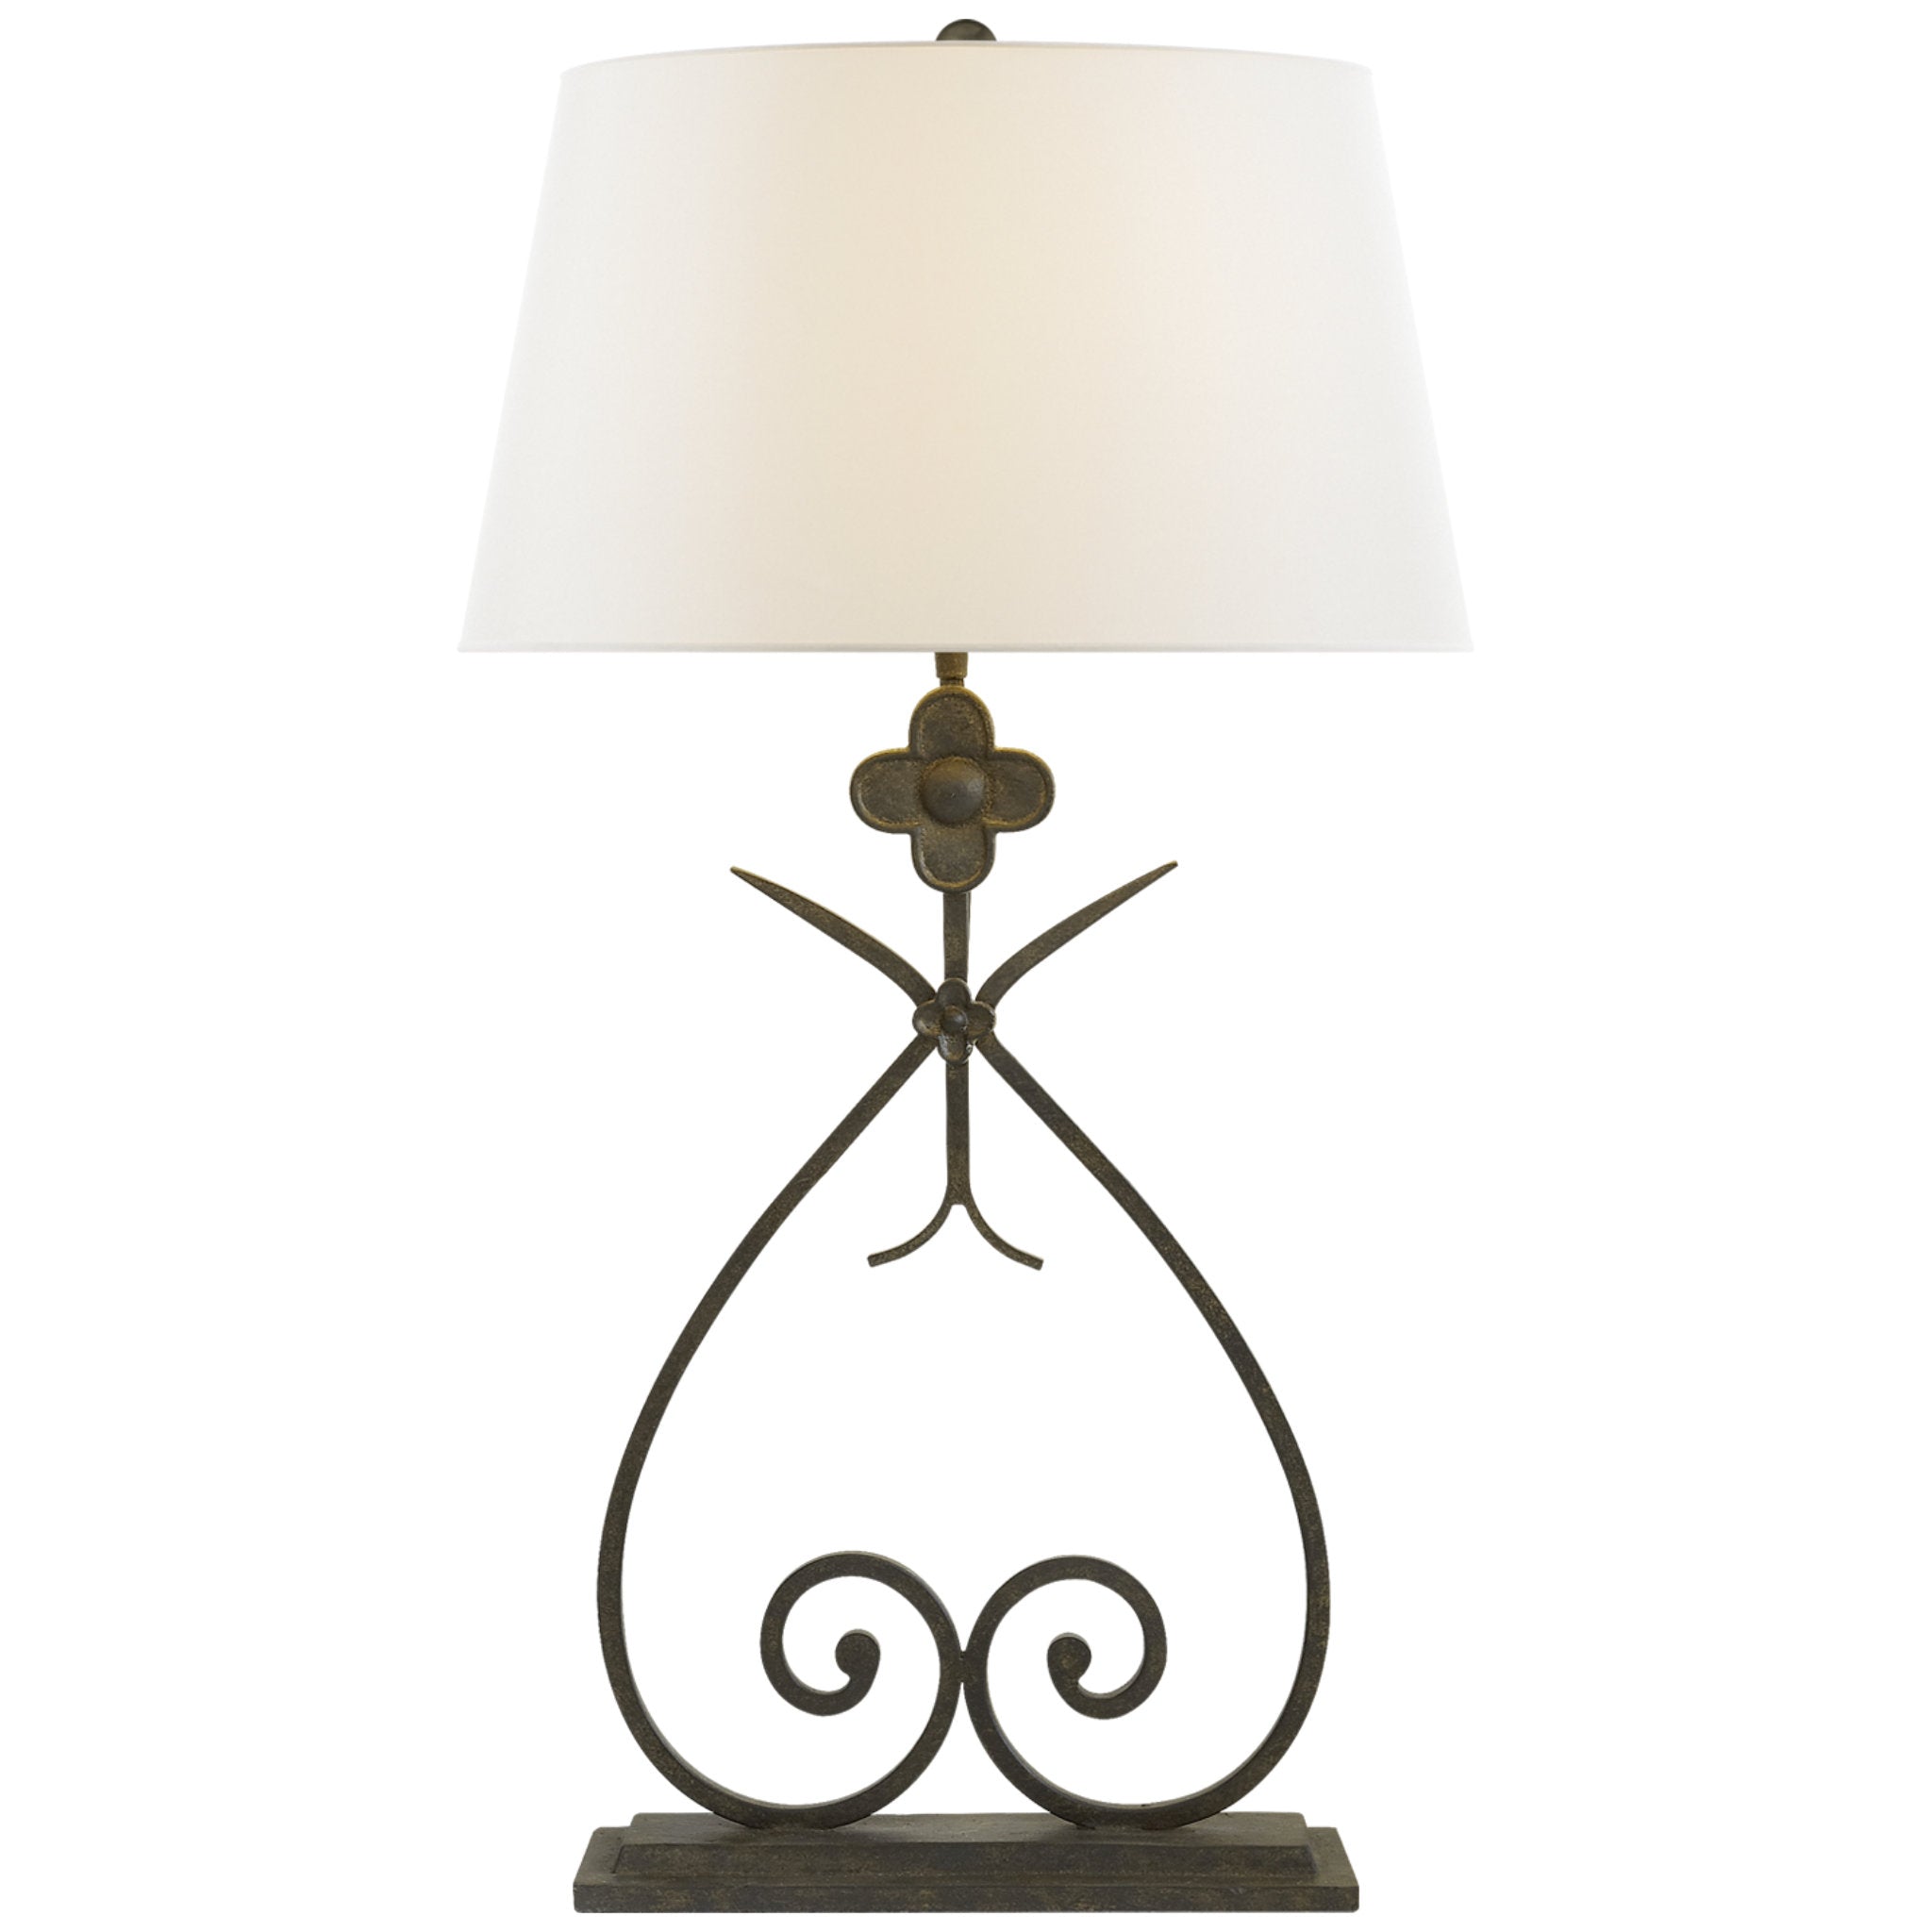 Suzanne Kasler Harper Table Lamp in Natural Rust with Linen Shade